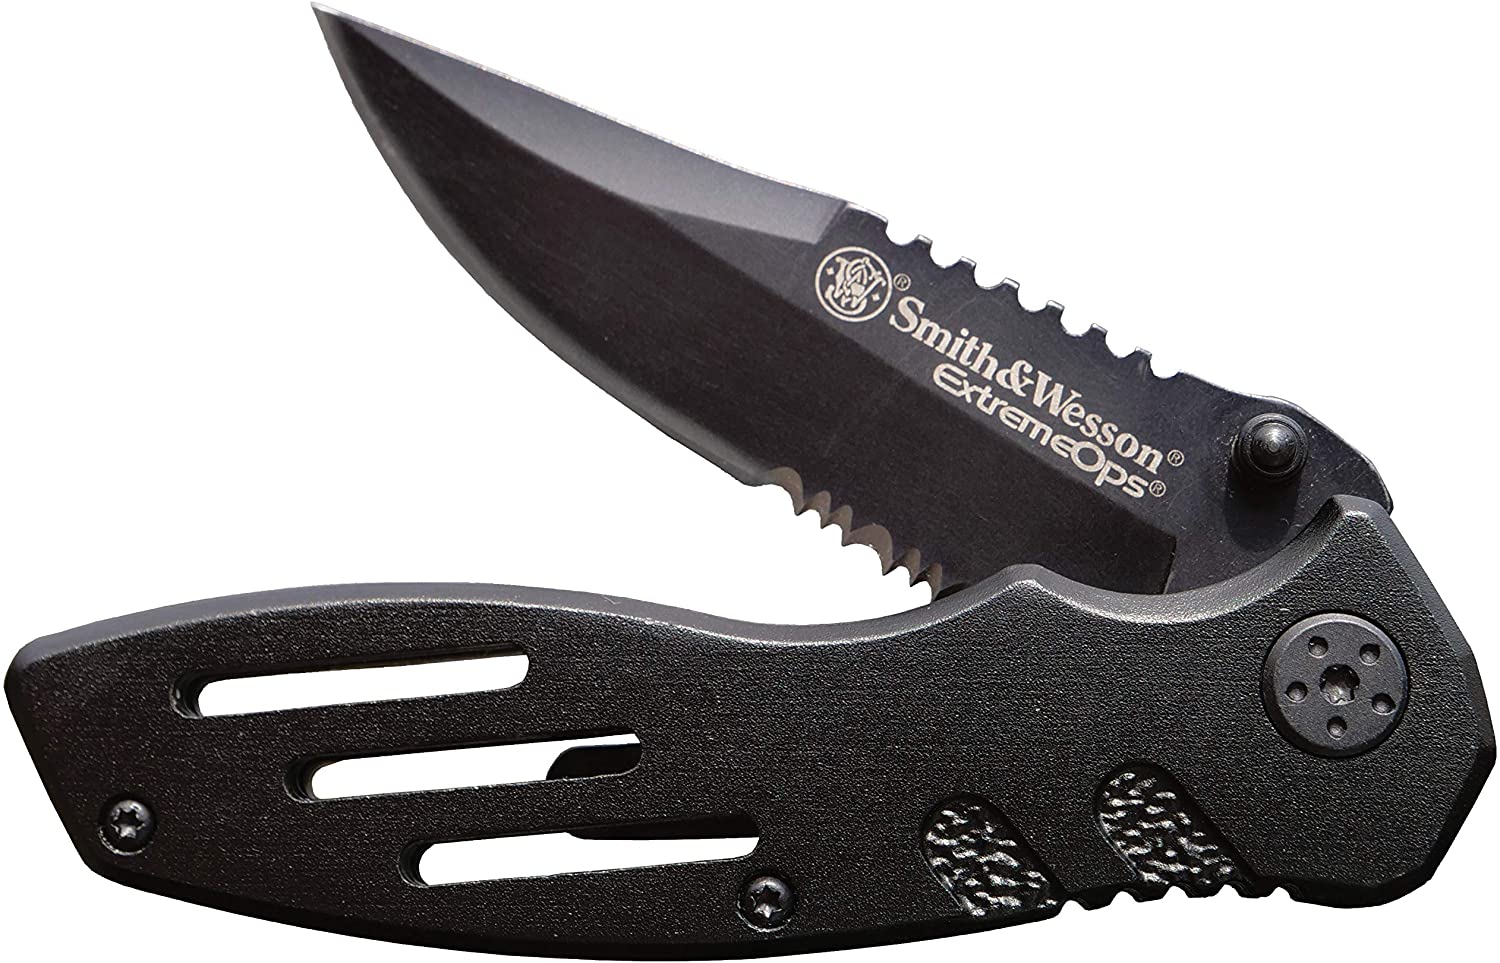 Smith & Wesson Extreme Ops Serrated Clip Point Blade and Aluminum Handle for Outdoor -3.8oz (103g)